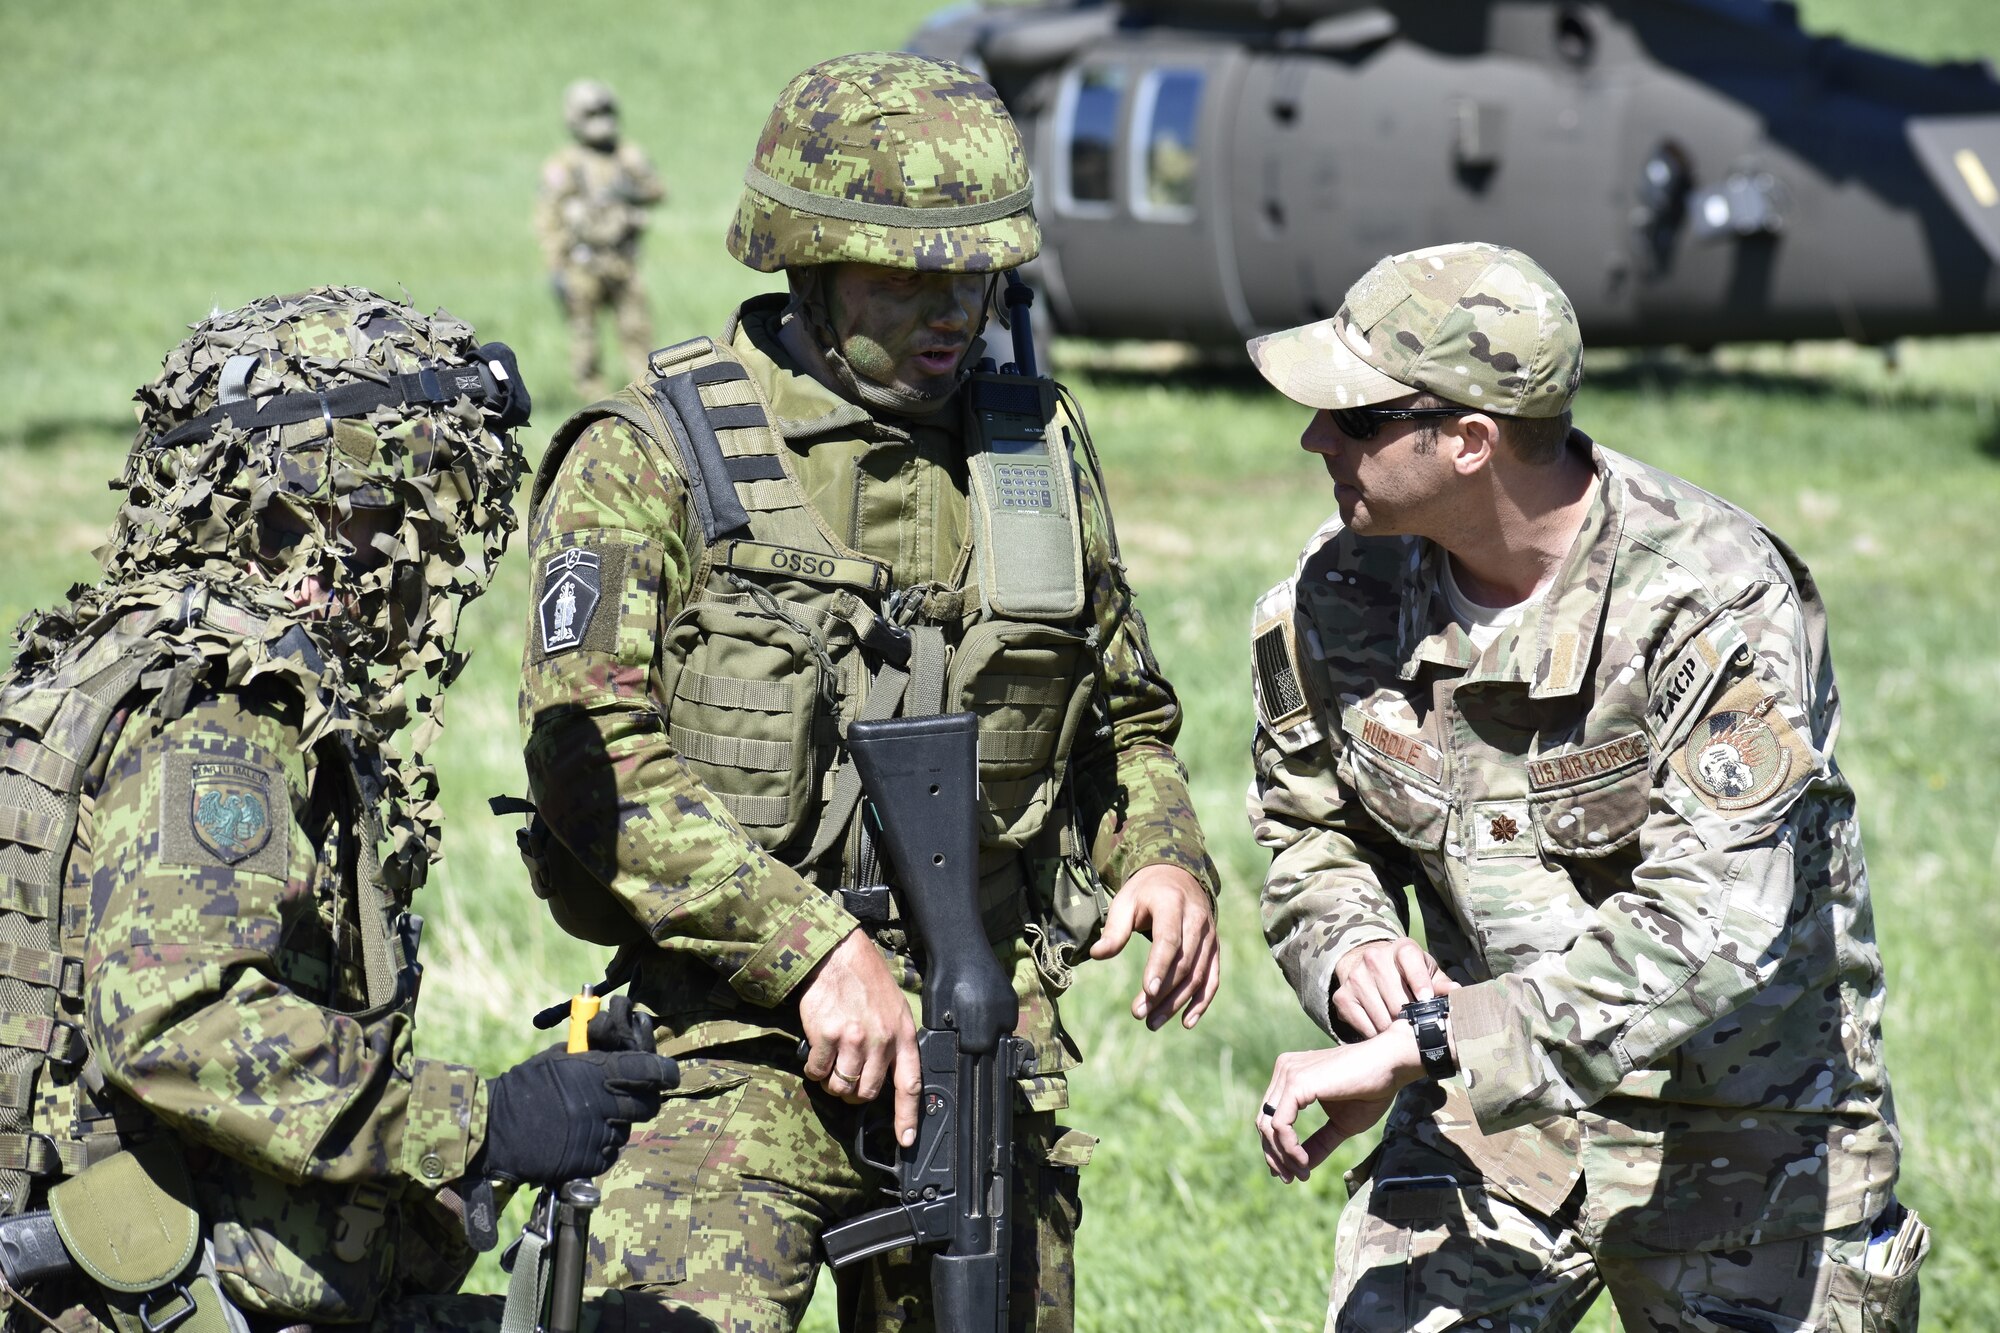 U.S. Air Force Maj. Karl Hurdle, Air Liaison Officer with Okla. National Guard’s 146th Air Support Operations Squadron, advises Lt. Janno Õsso, Estonian Defense Force’s 2nd brigade ALO, on Joint Terminal Attack Controller capabilities May 9th during Exercise HEDGEHOG 2018 in Southern Estonia. The Tactical Air Control Party members served as advisers to the Estonian Defense Force to create combined fires between U.S. Army and multinational aviation assets.  Photo By Maj. Kurt M. Rauschenberg, 58th EMIB Public Affairs Officer.